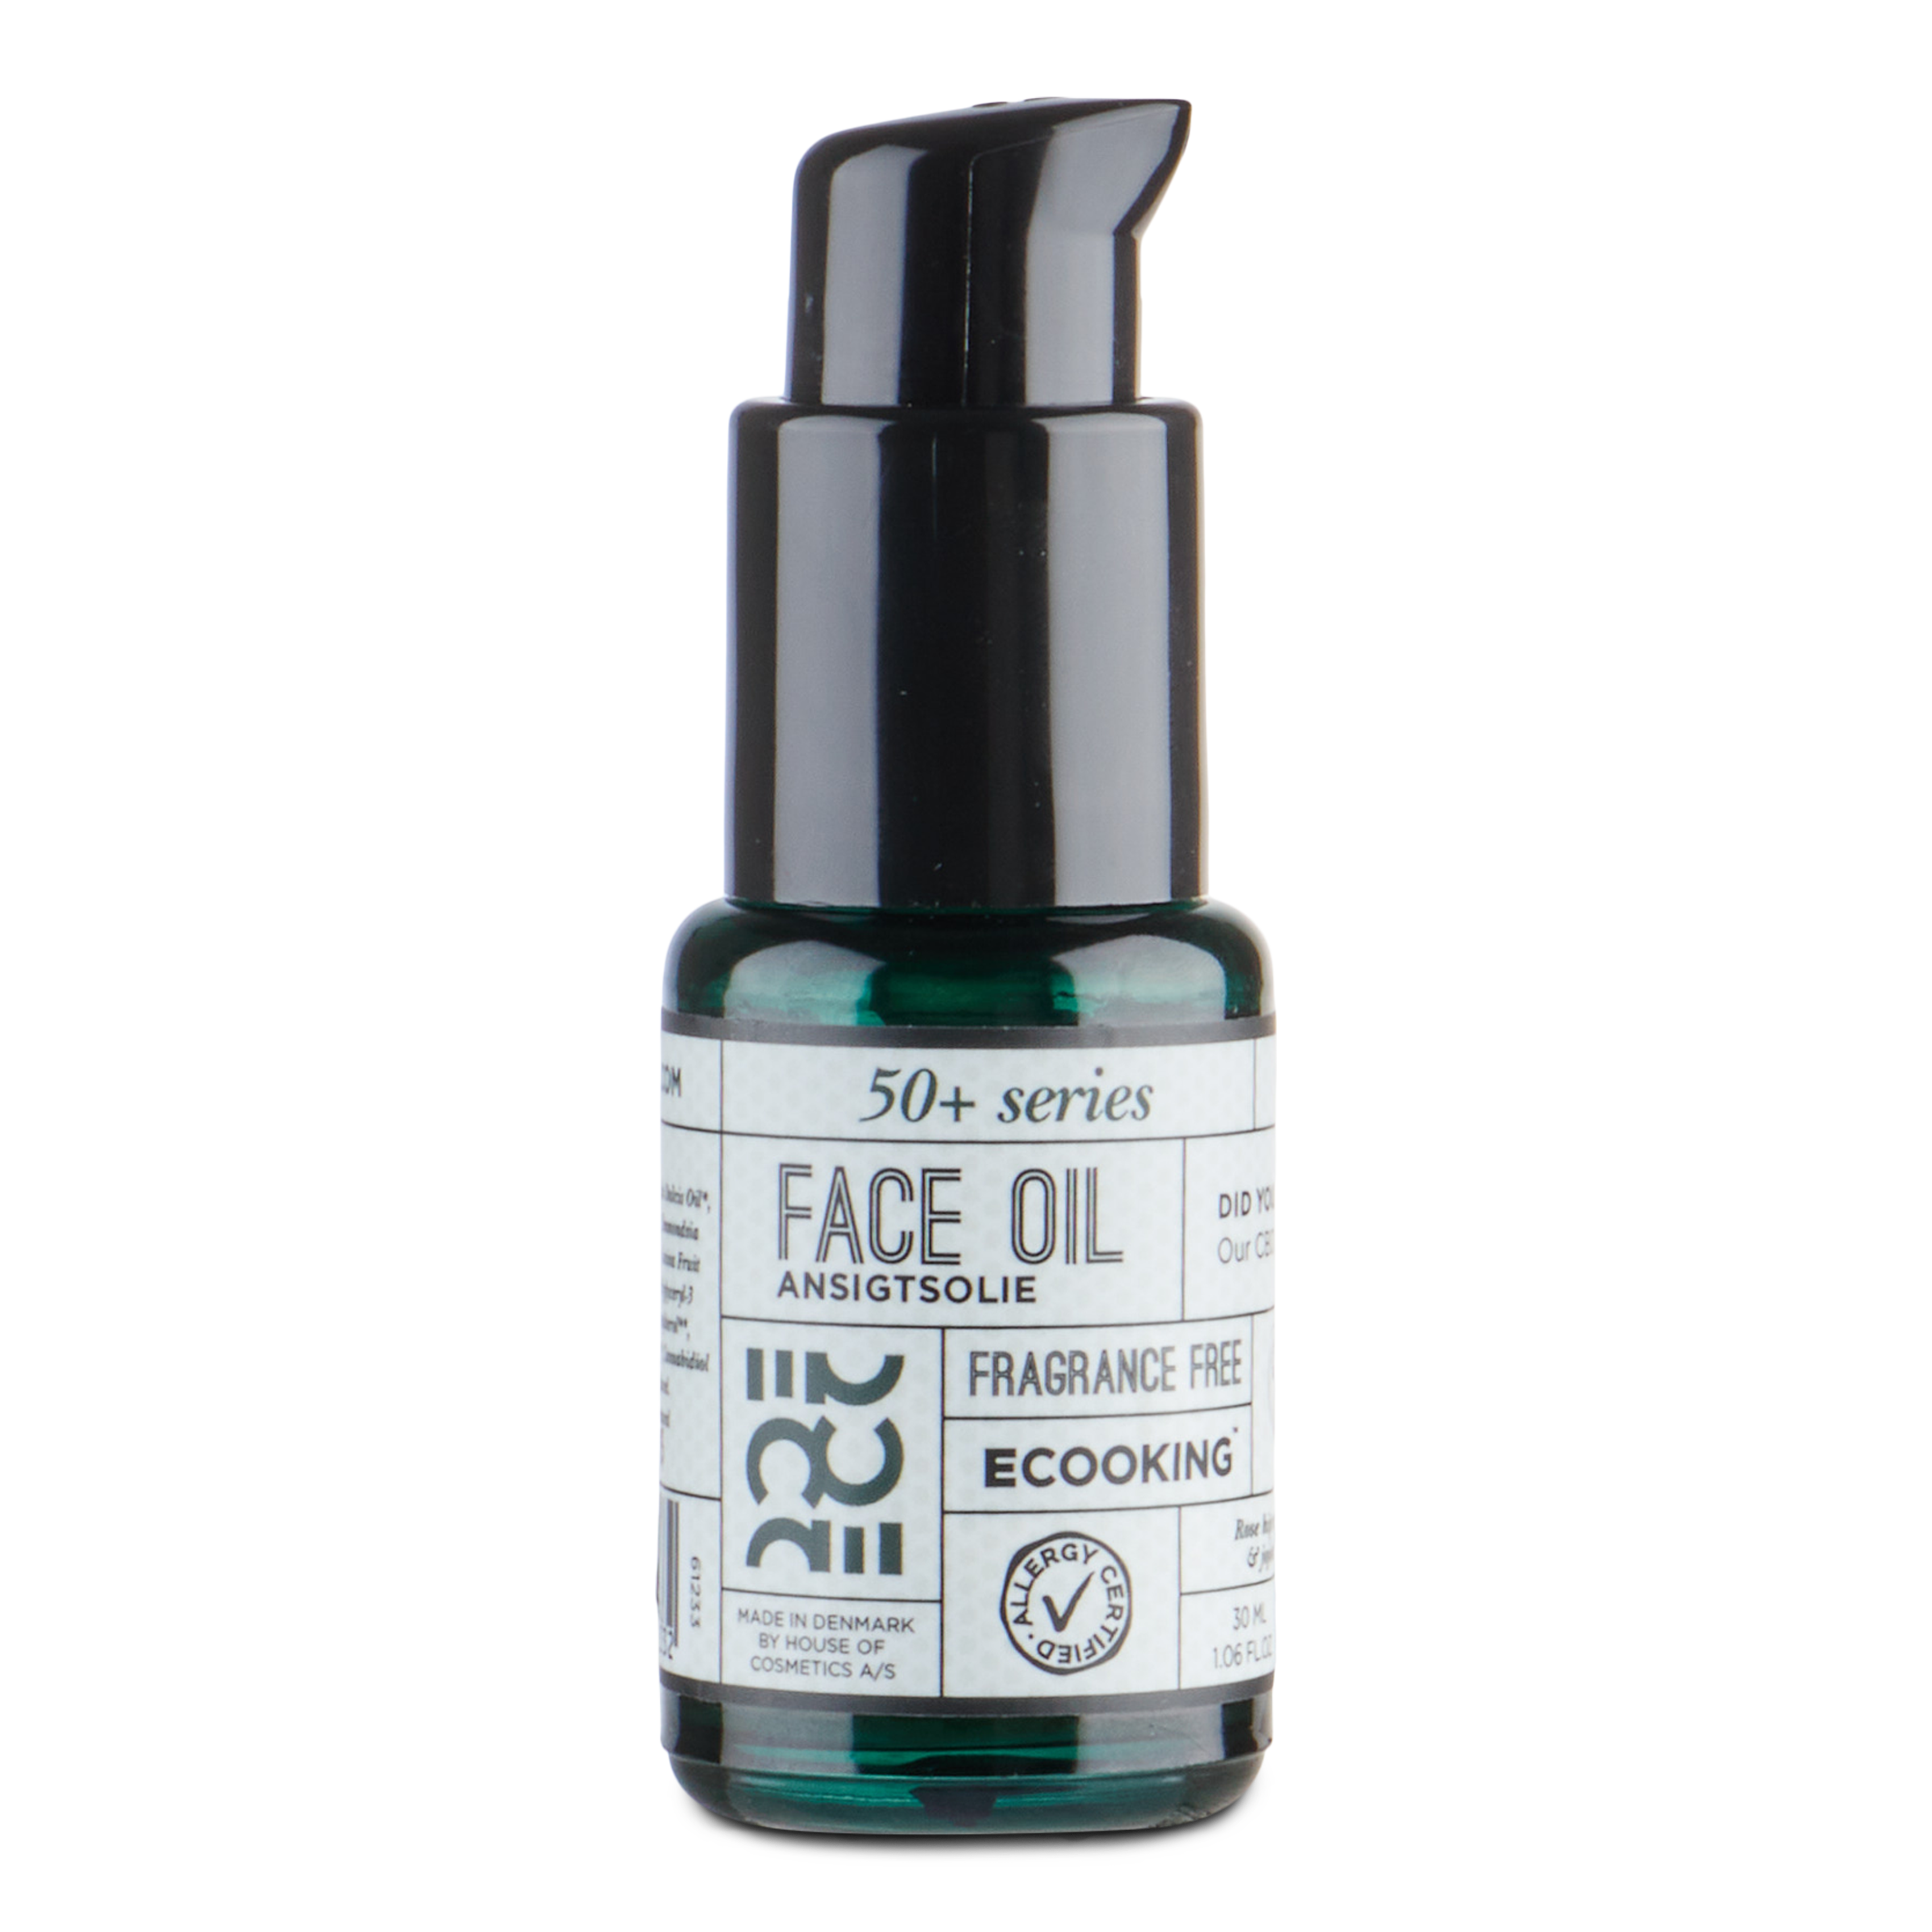 Ecooking - 50+ Face Oil 30 ml